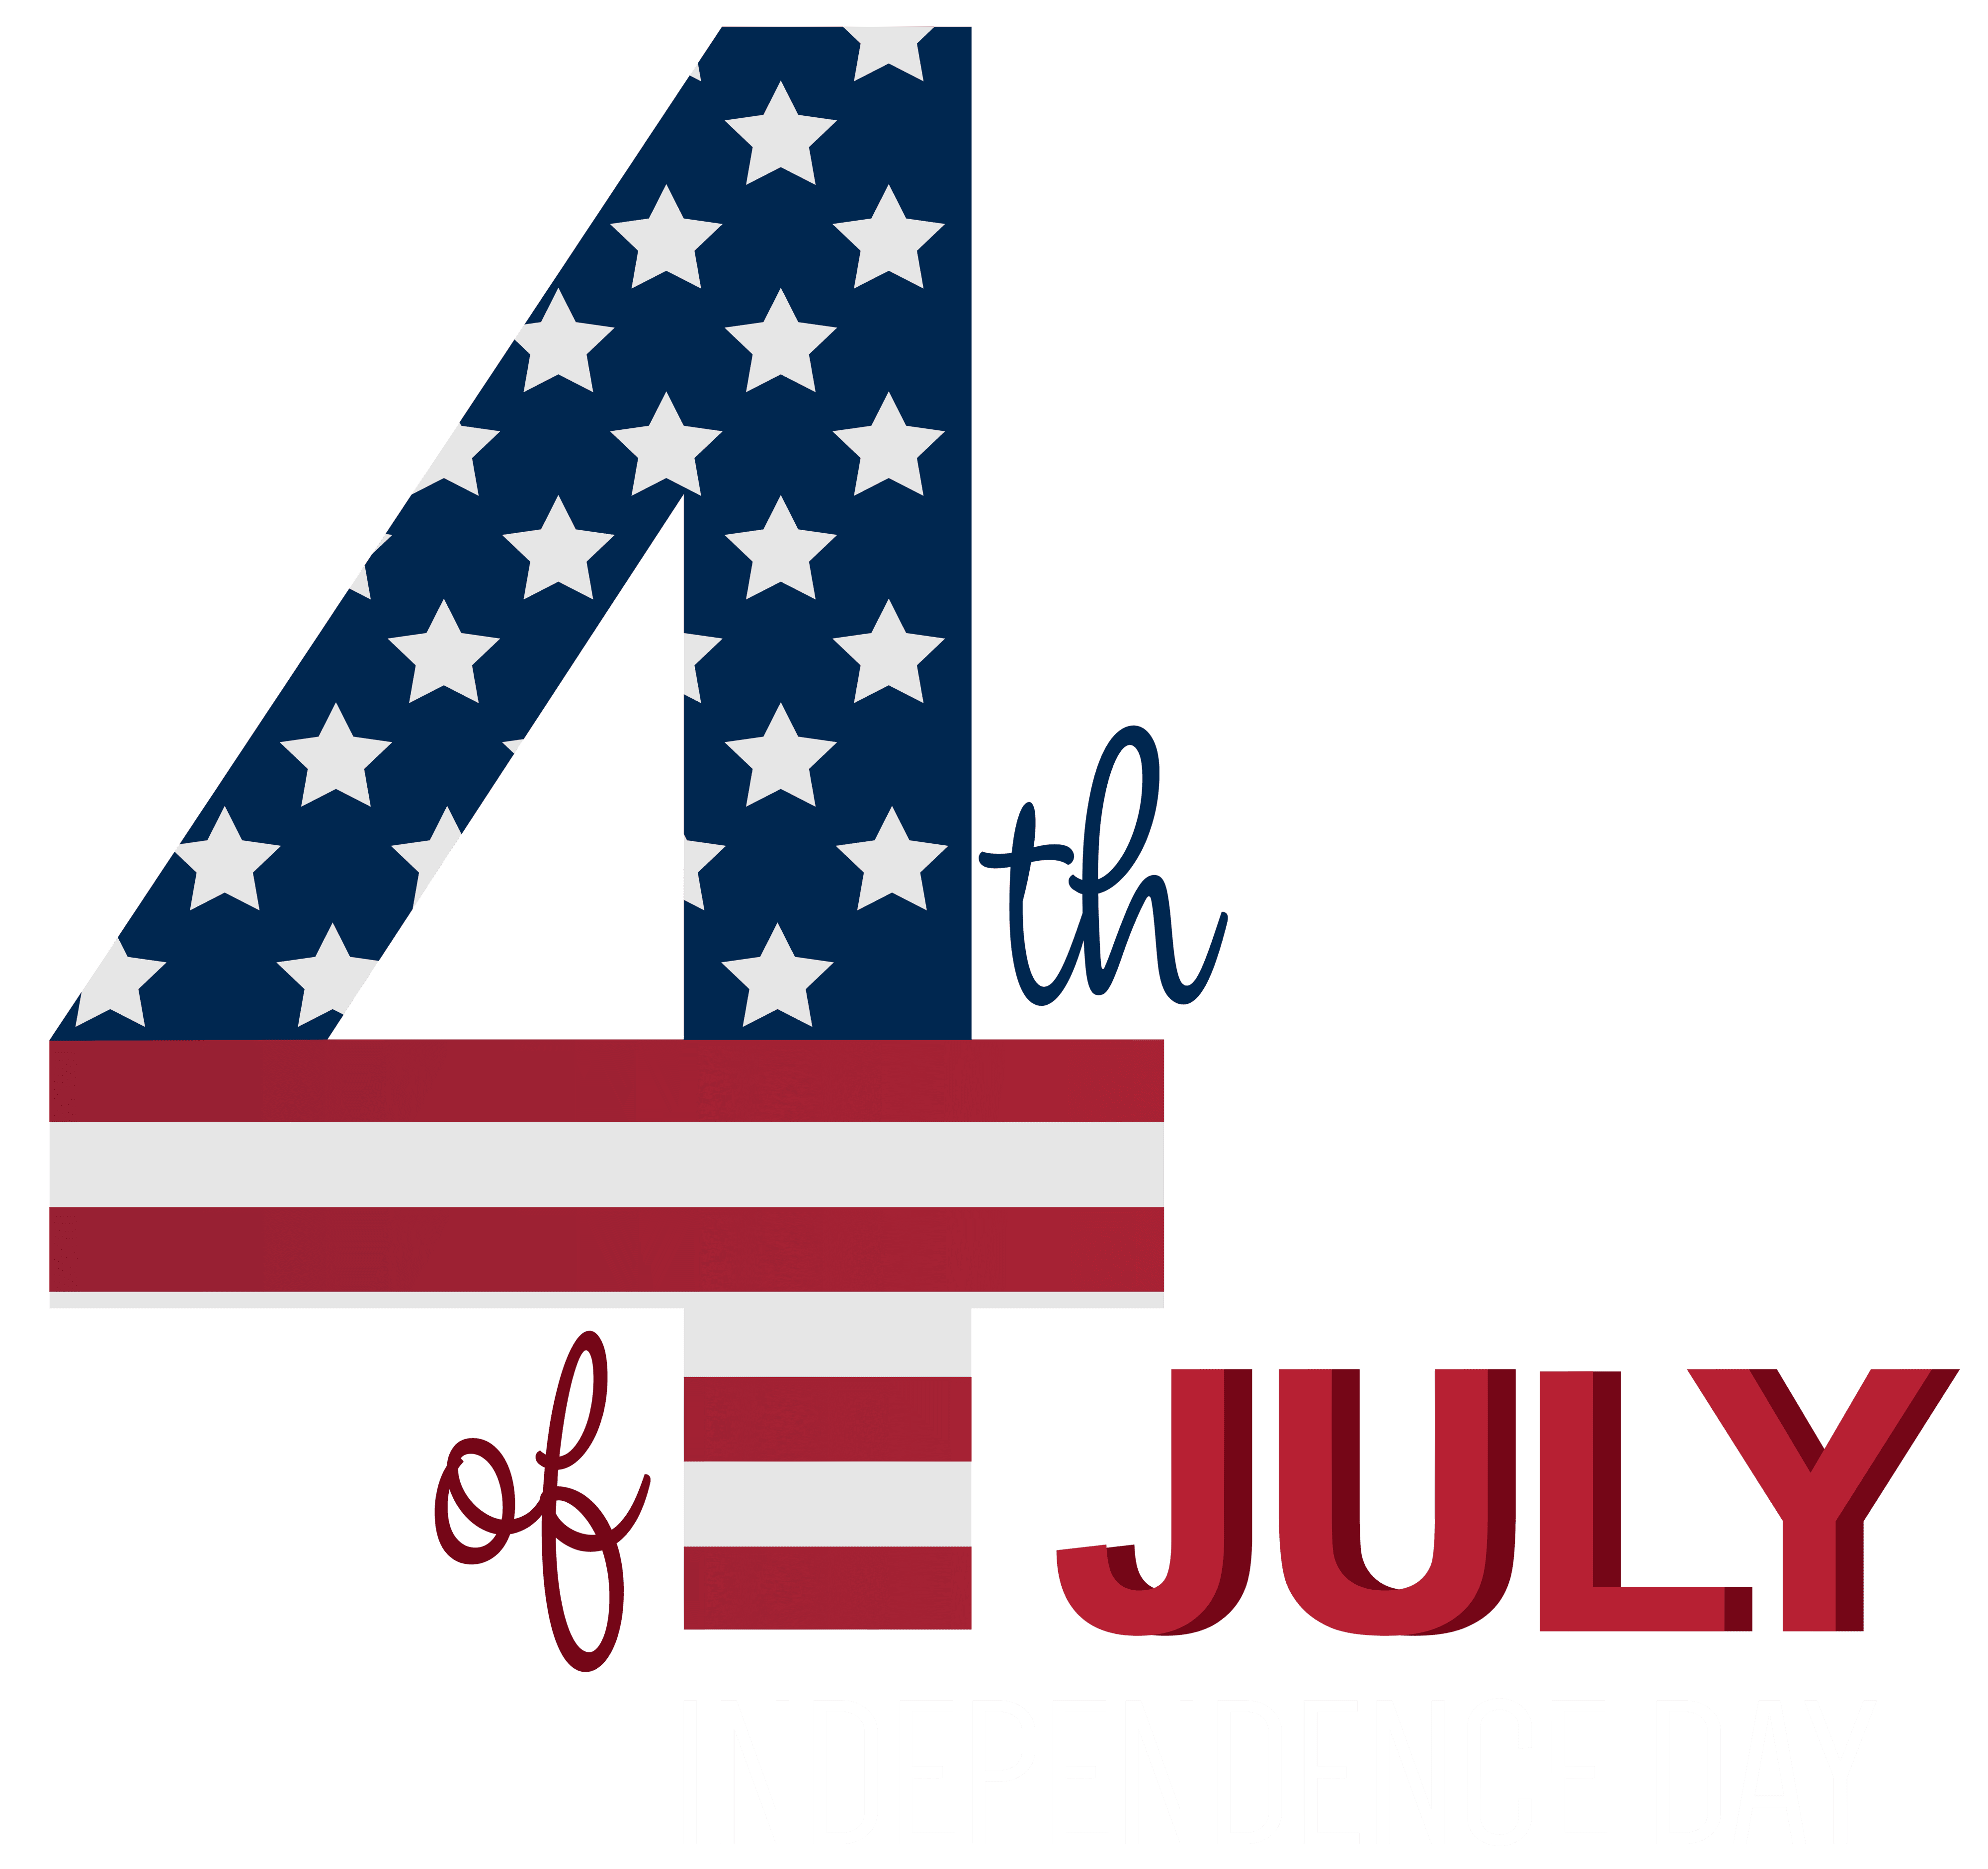 4th of July Transparent PNG Clip Art Image